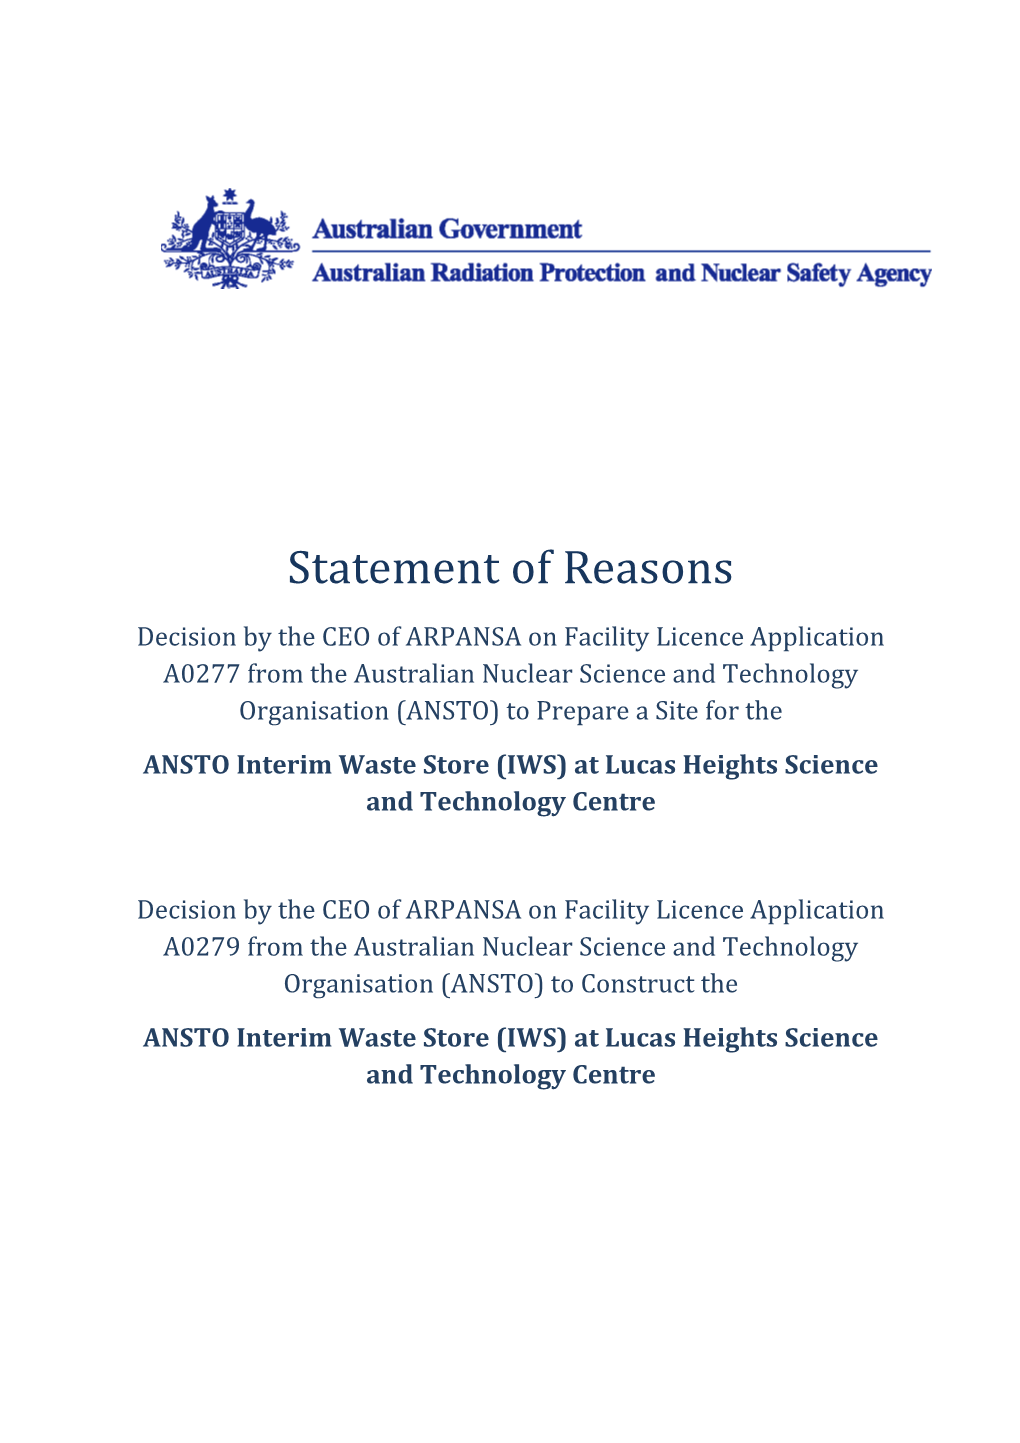 CEO's Statement of Reasons - Decision on Licence Application A0277 and A0279